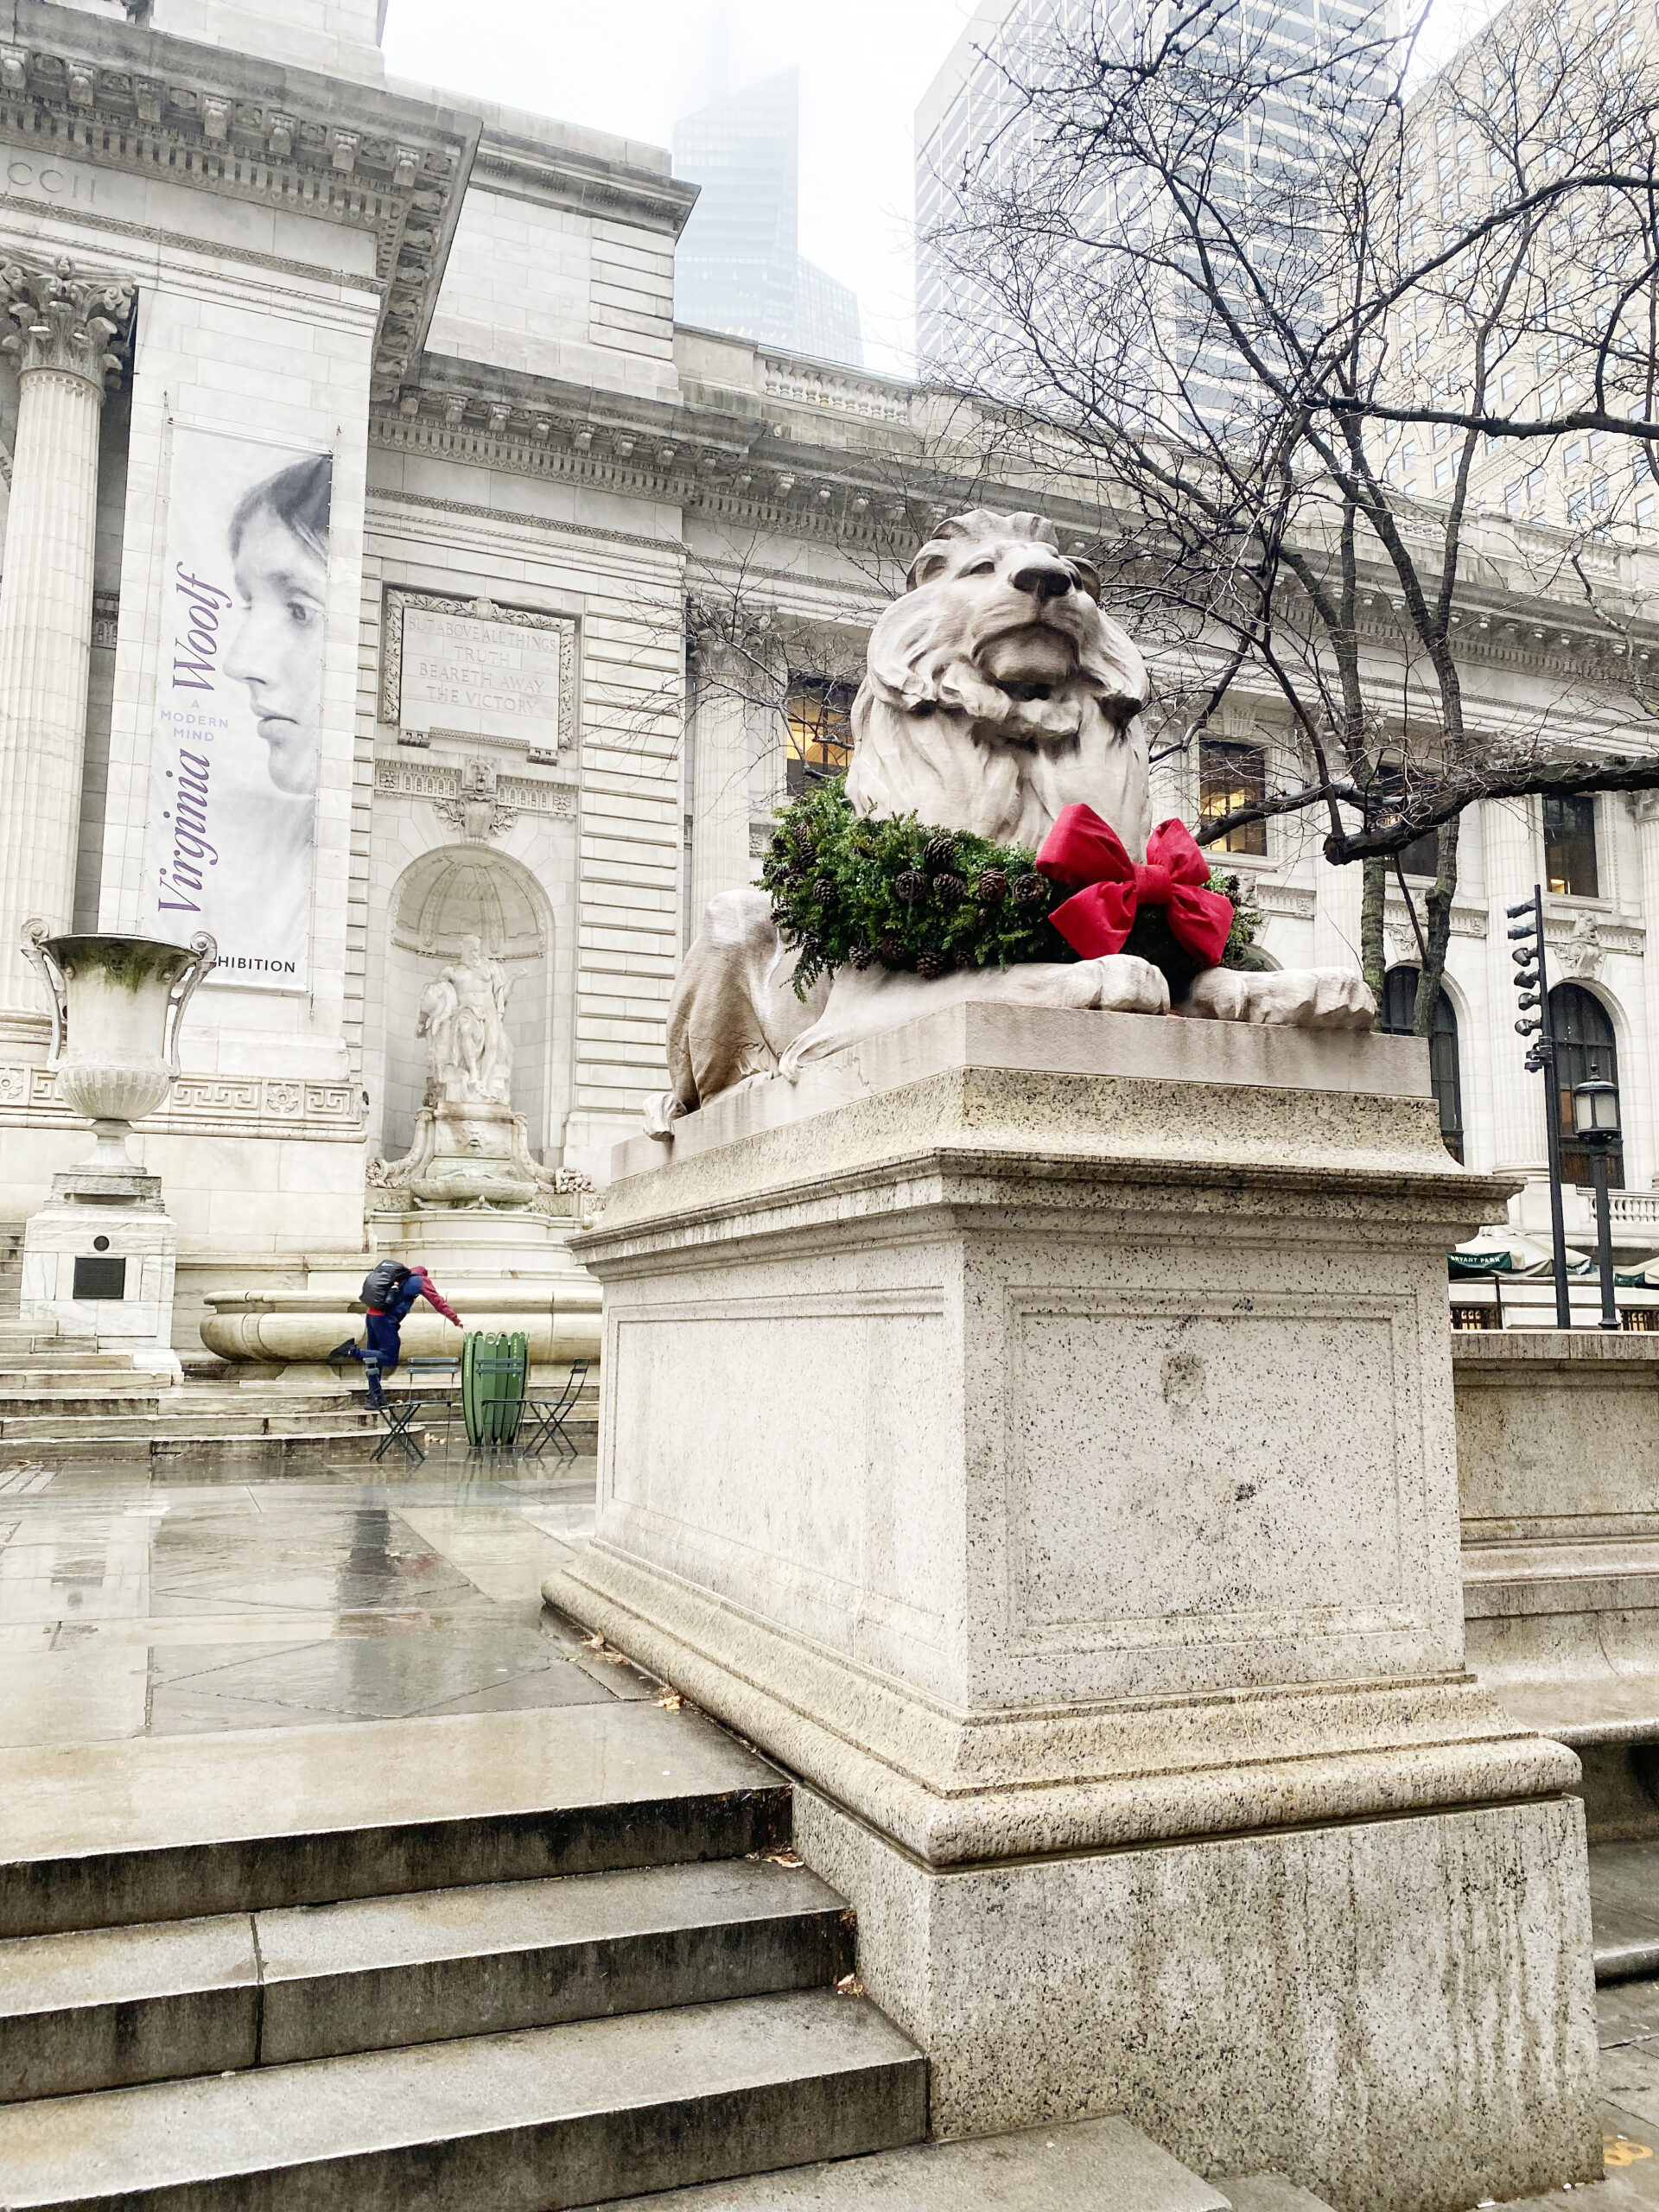 New York City library--Our Favorite Things to Do in New York City that will make your trip memorable, festive and of course magical! Darling Darleen Top Lifestyle blogger